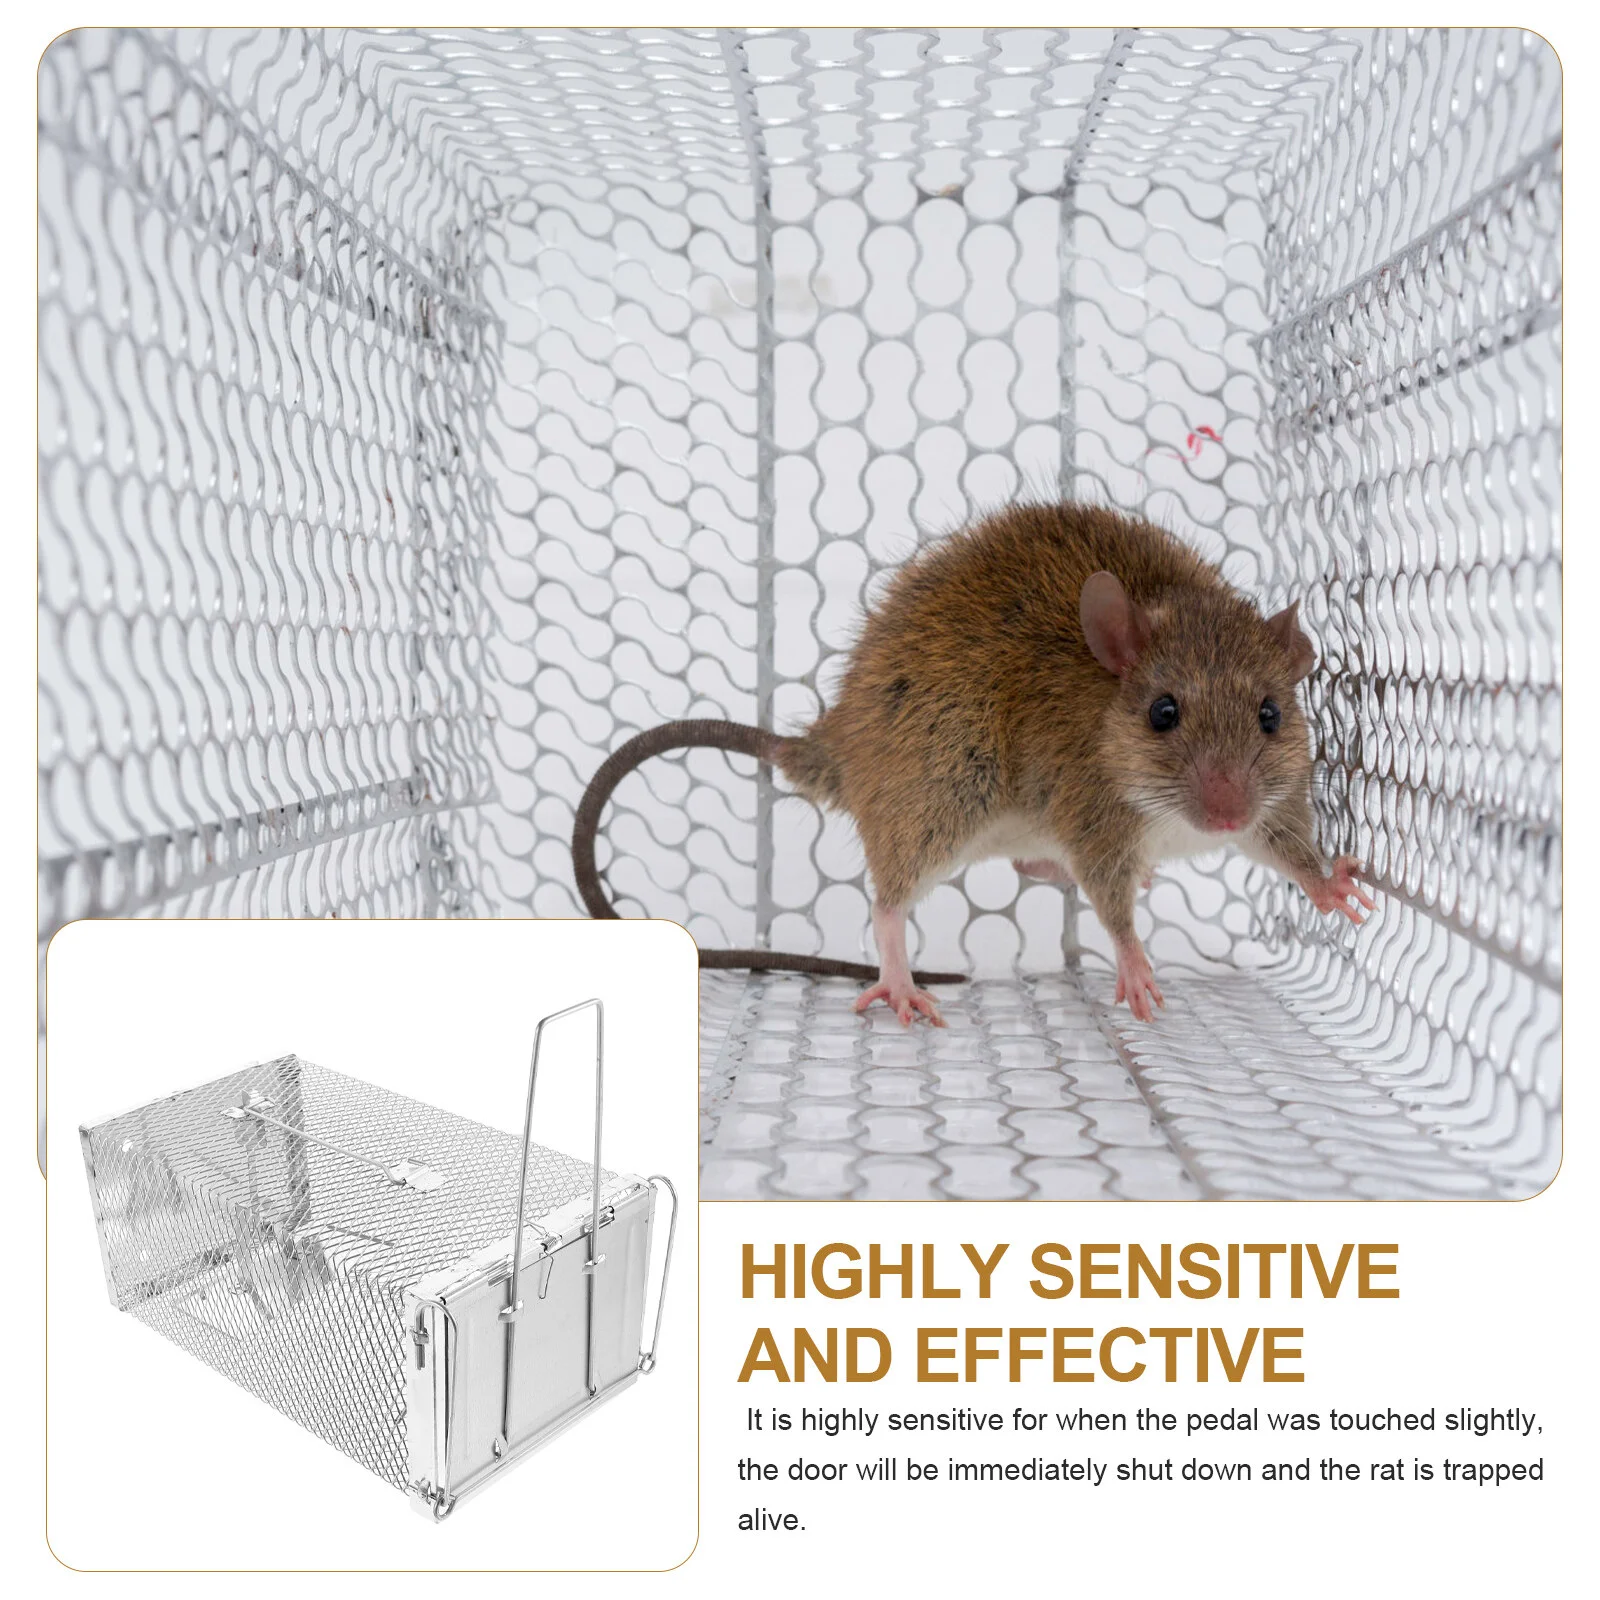 https://ae01.alicdn.com/kf/Sc5131126281a4780b9cd31c52517cb07Q/Rat-Trap-Mouse-Cage-Catcher-for-Rats-Mice-Hamsters-Chipmunks-Similar-sized-Live-Rodent.jpg